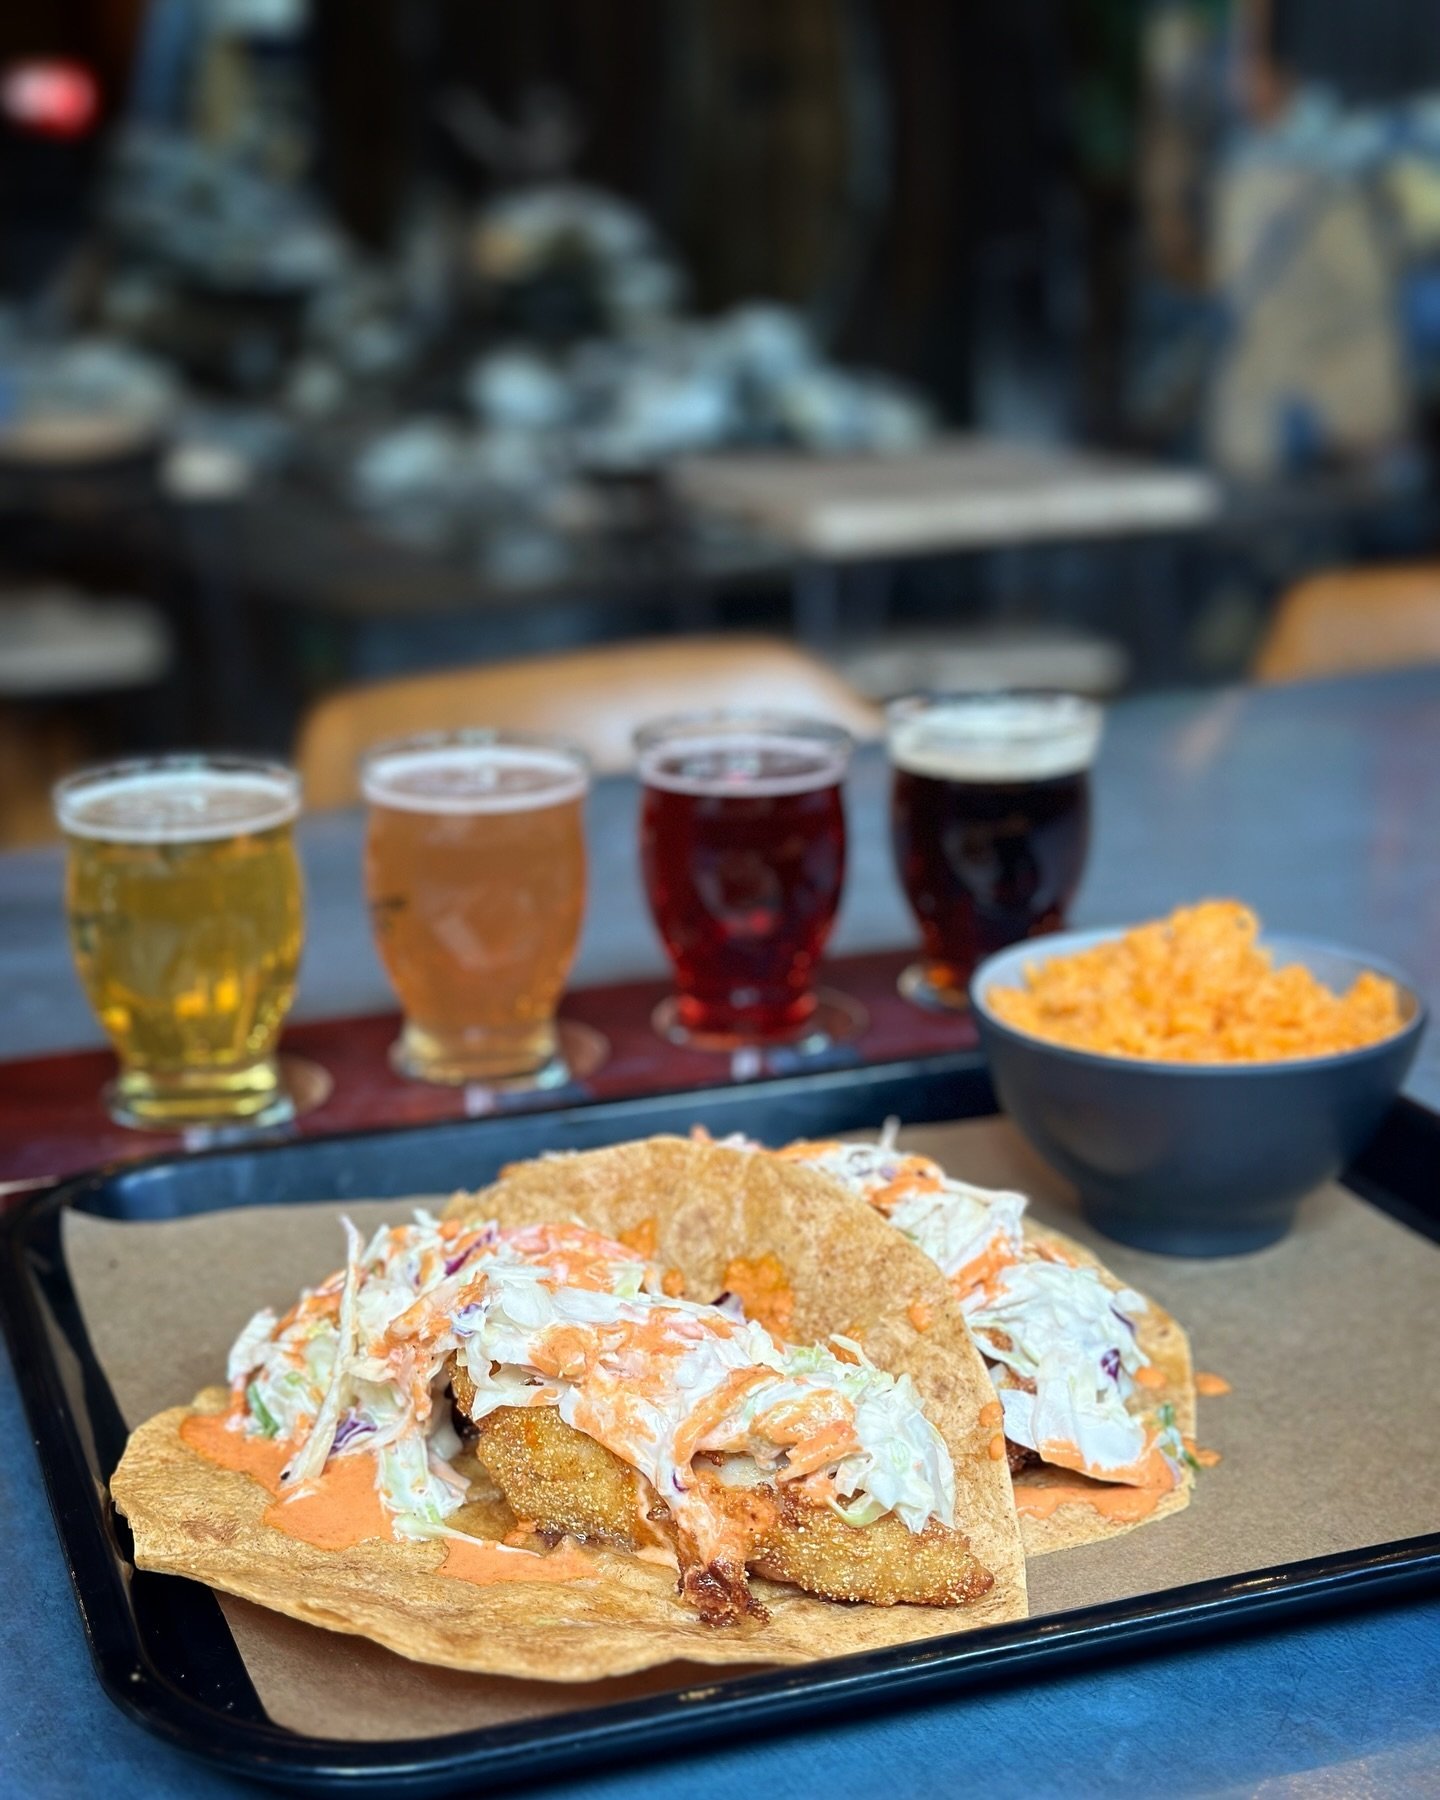 Sunday Vibes with a perfect pair; fish tacos and a colorful beer flight! Cheers! 🍻